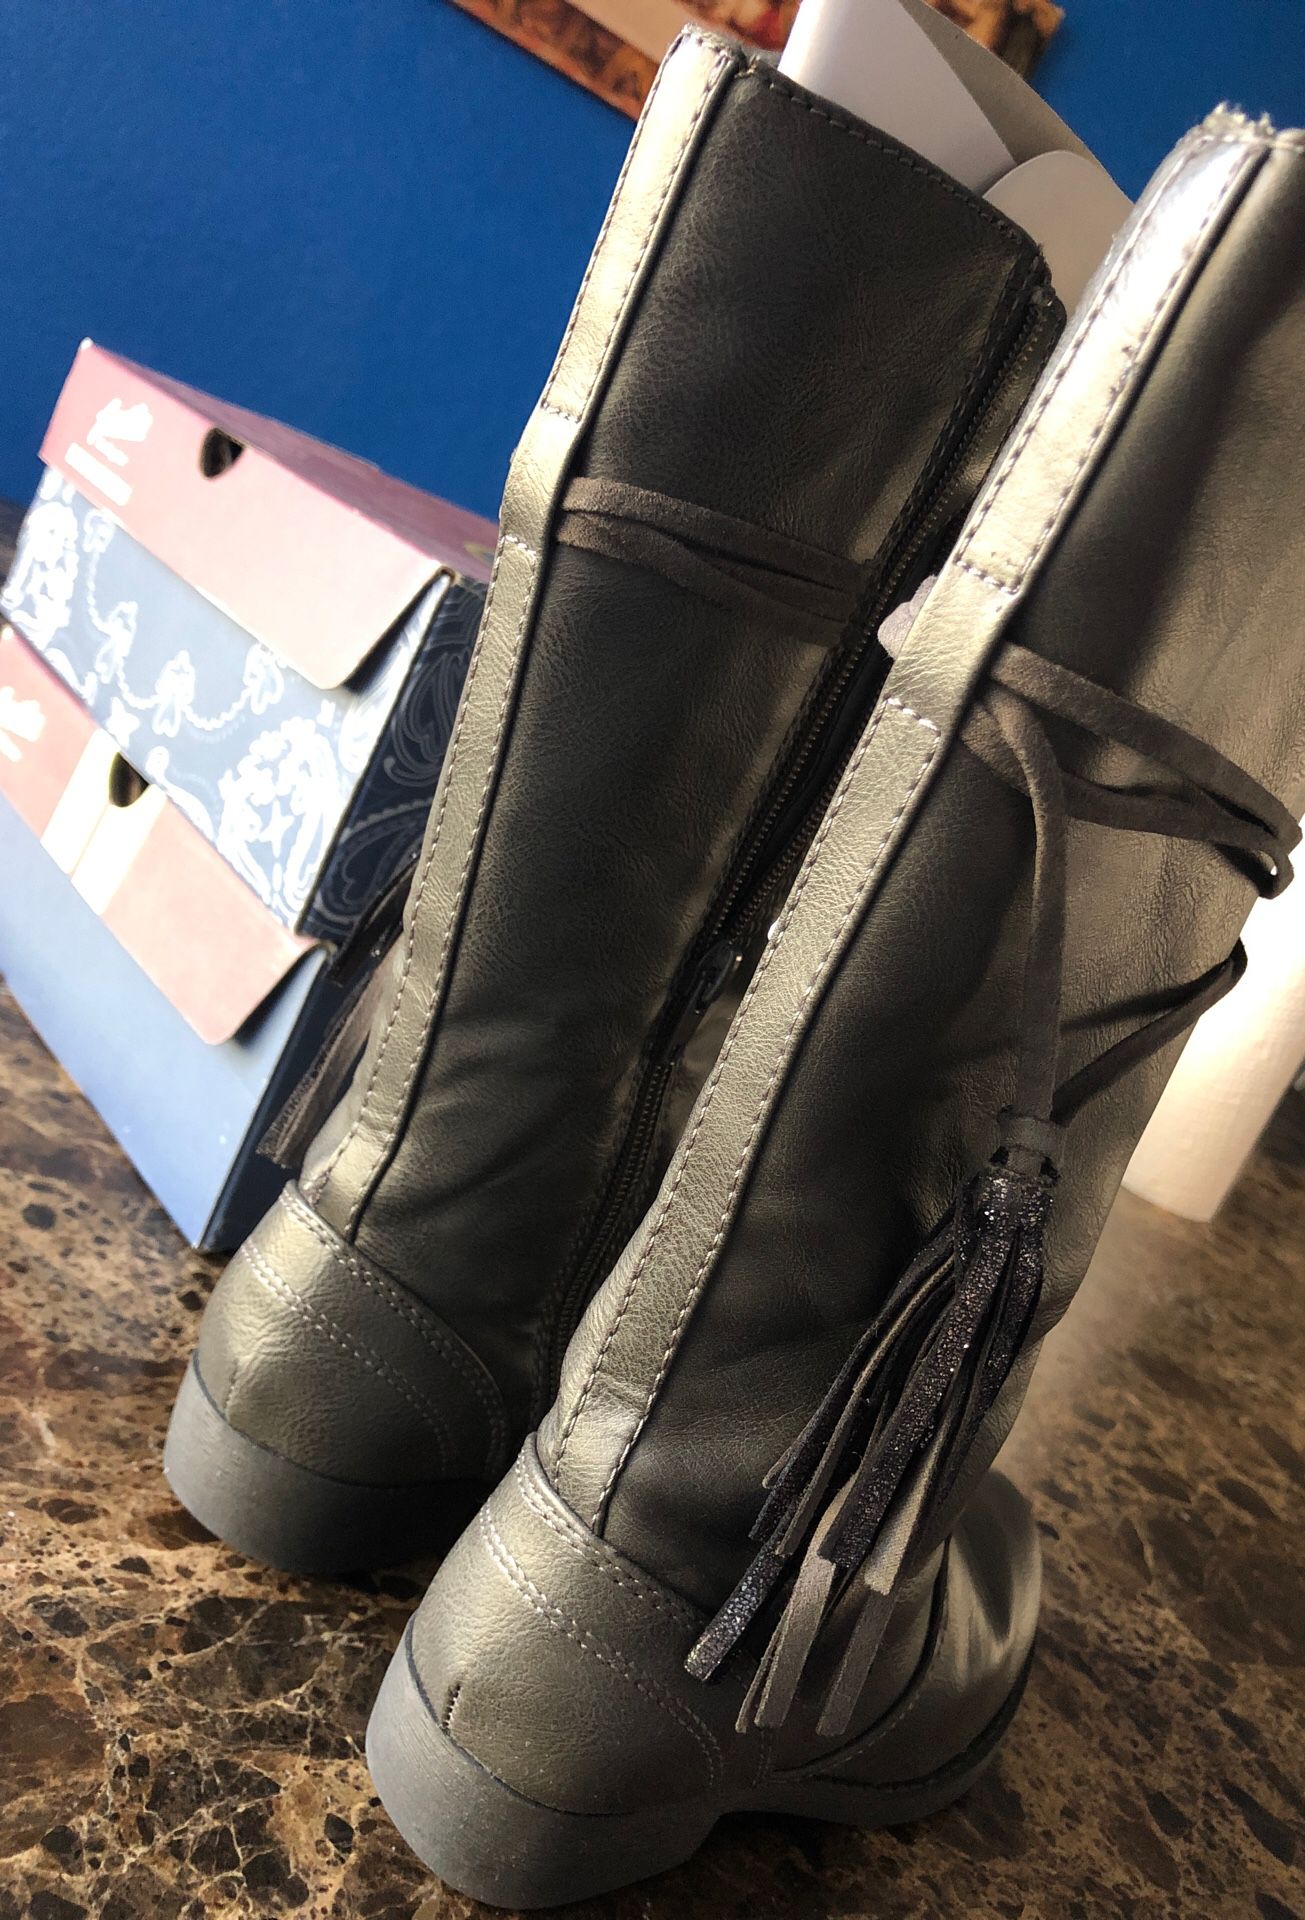 Used girls boots size 12 $6